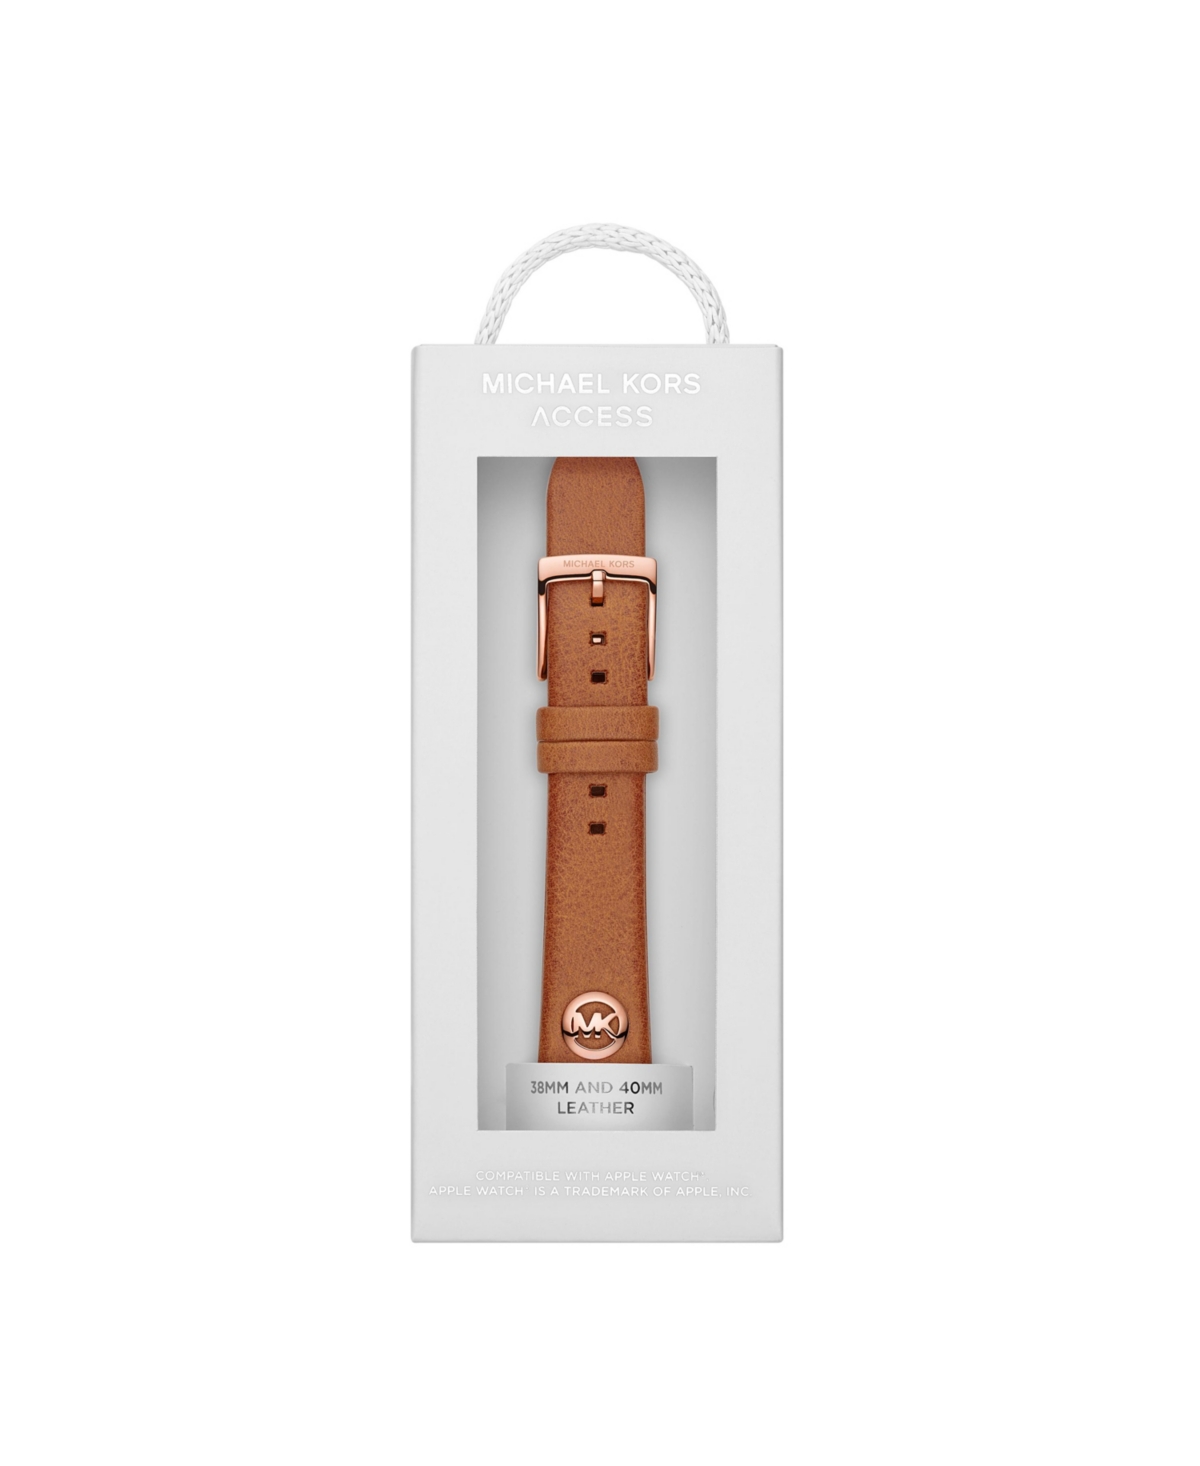 Shop Michael Kors Logo Charm Luggage Leather 38/40mm Band For Apple Watch In Brown